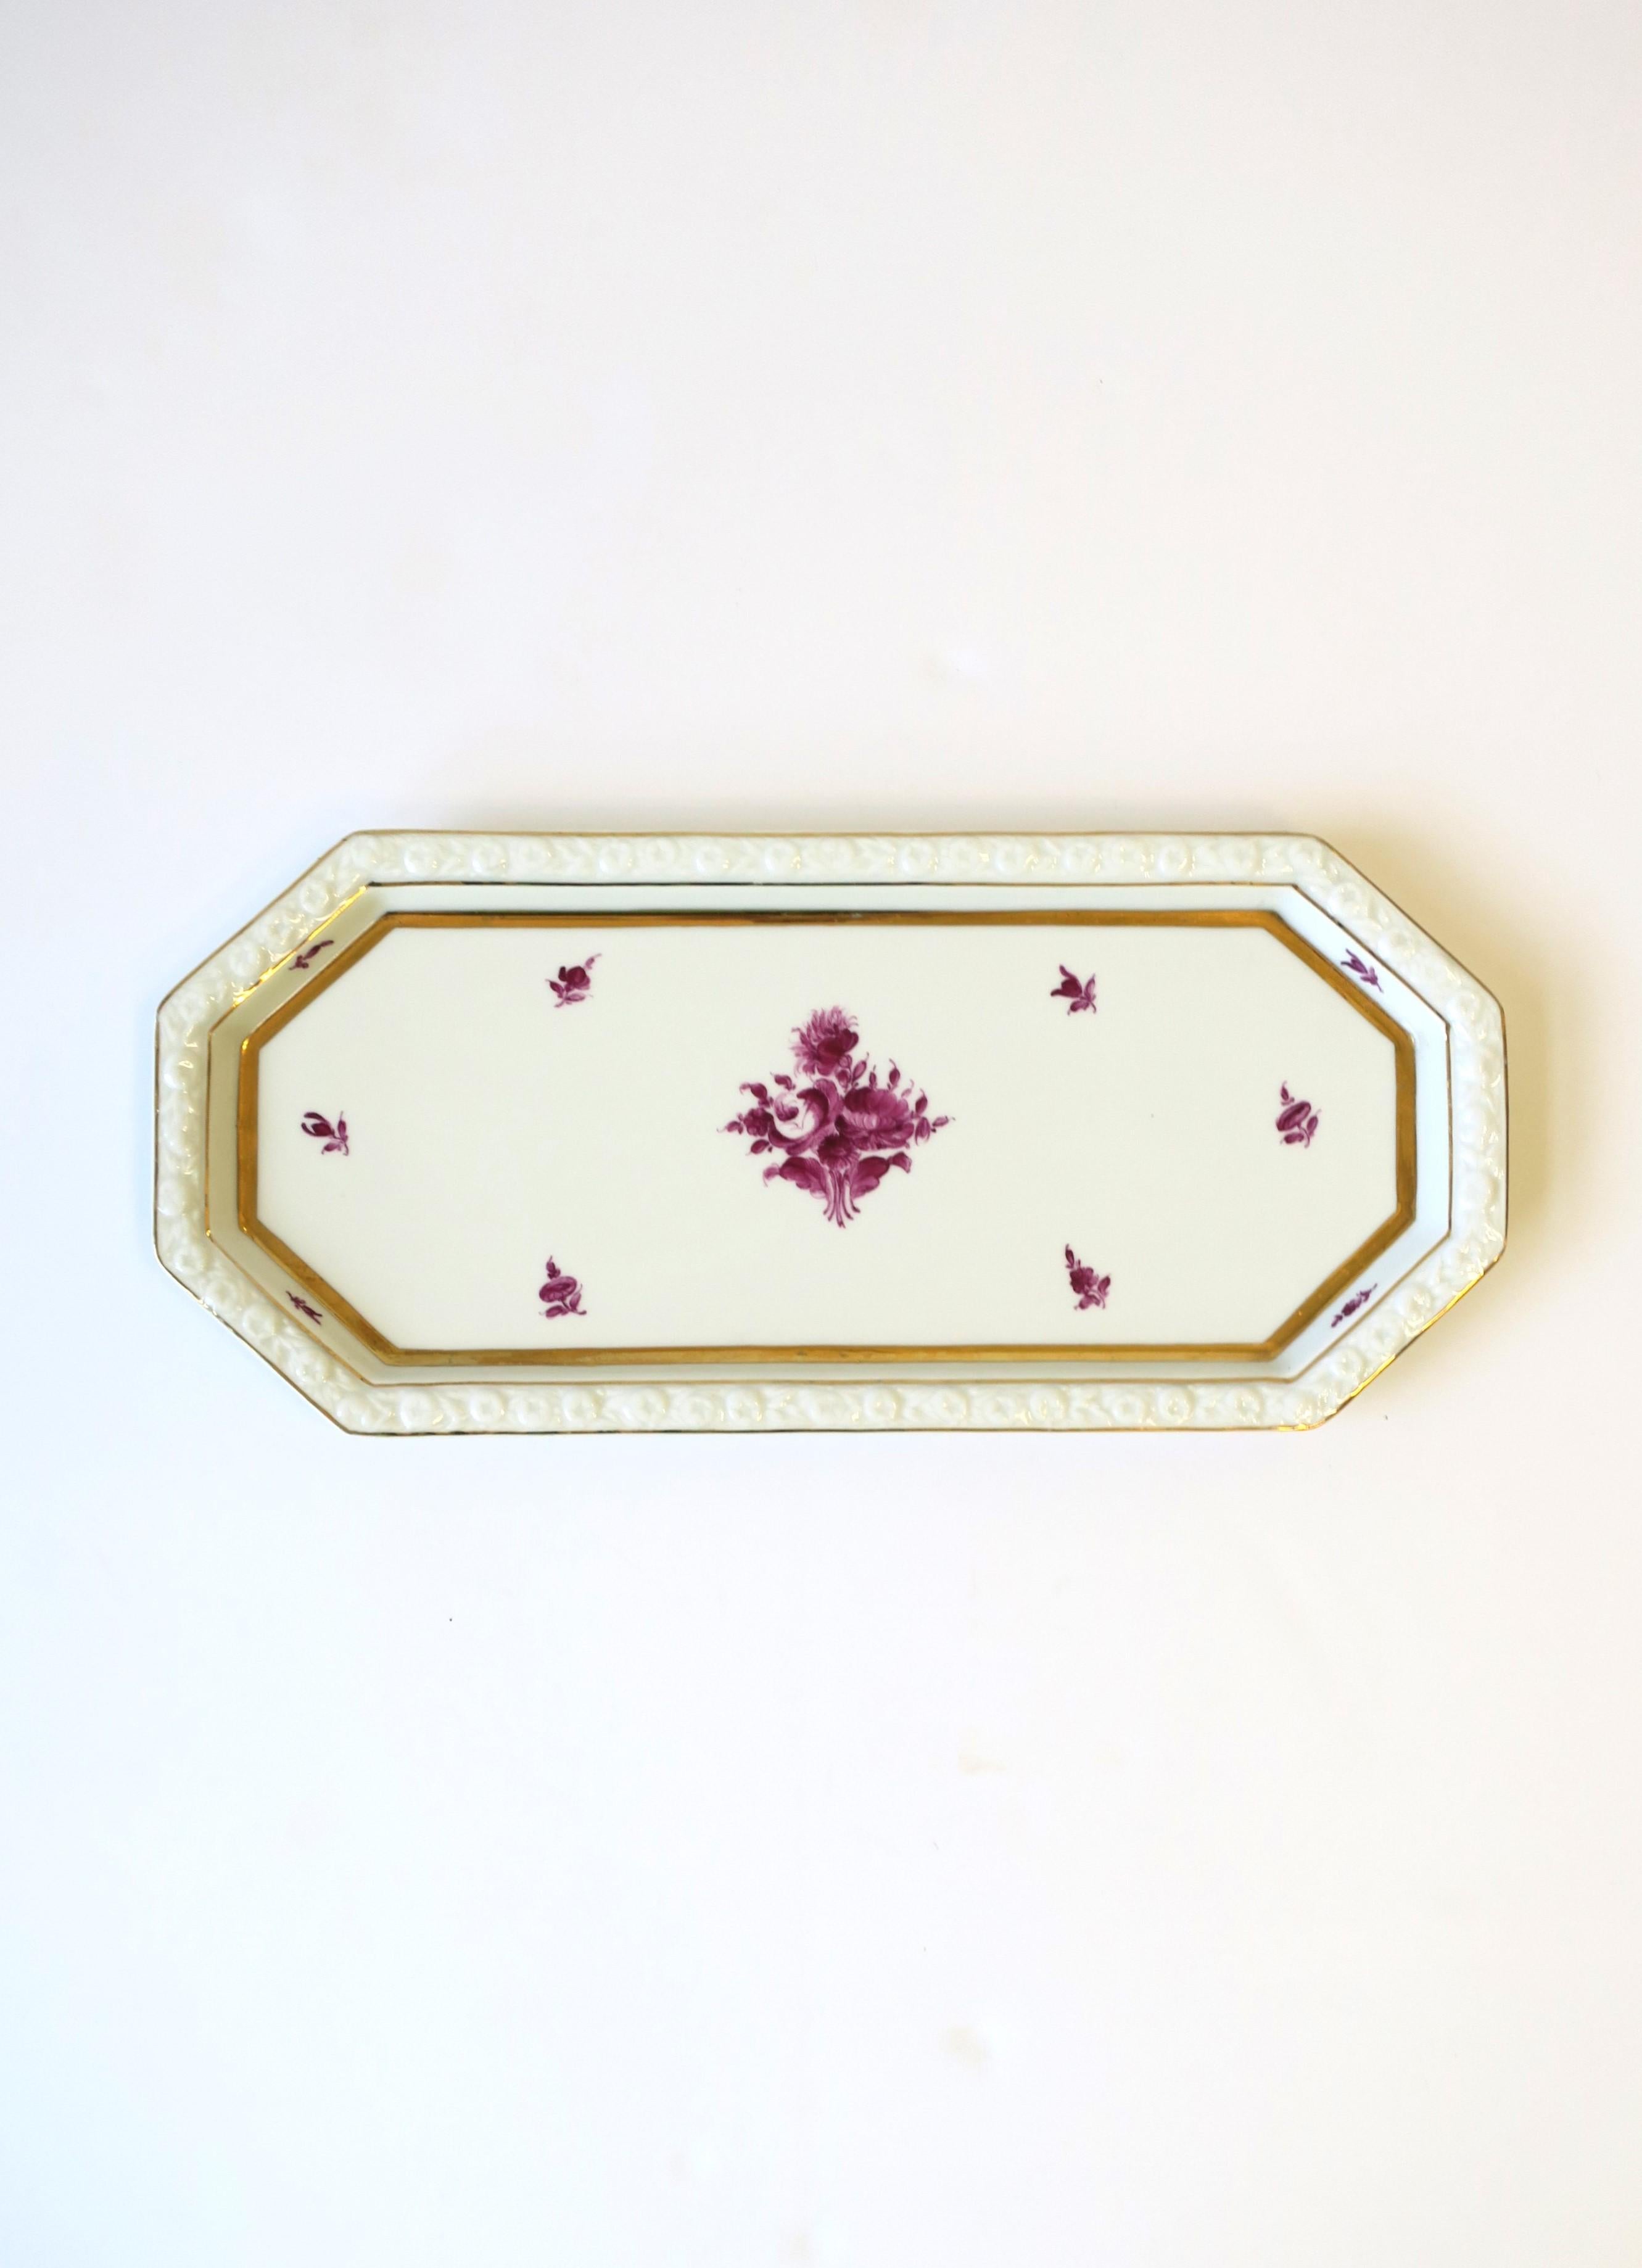 A German white porcelain serving (or vanity) tray with hand-painted floral design and gold detail, circa mid to late-20th century, Germany. Tray is oblong/octagonal and can serve cuisine or work as a 'vanity' tray as demonstrated. Tray is